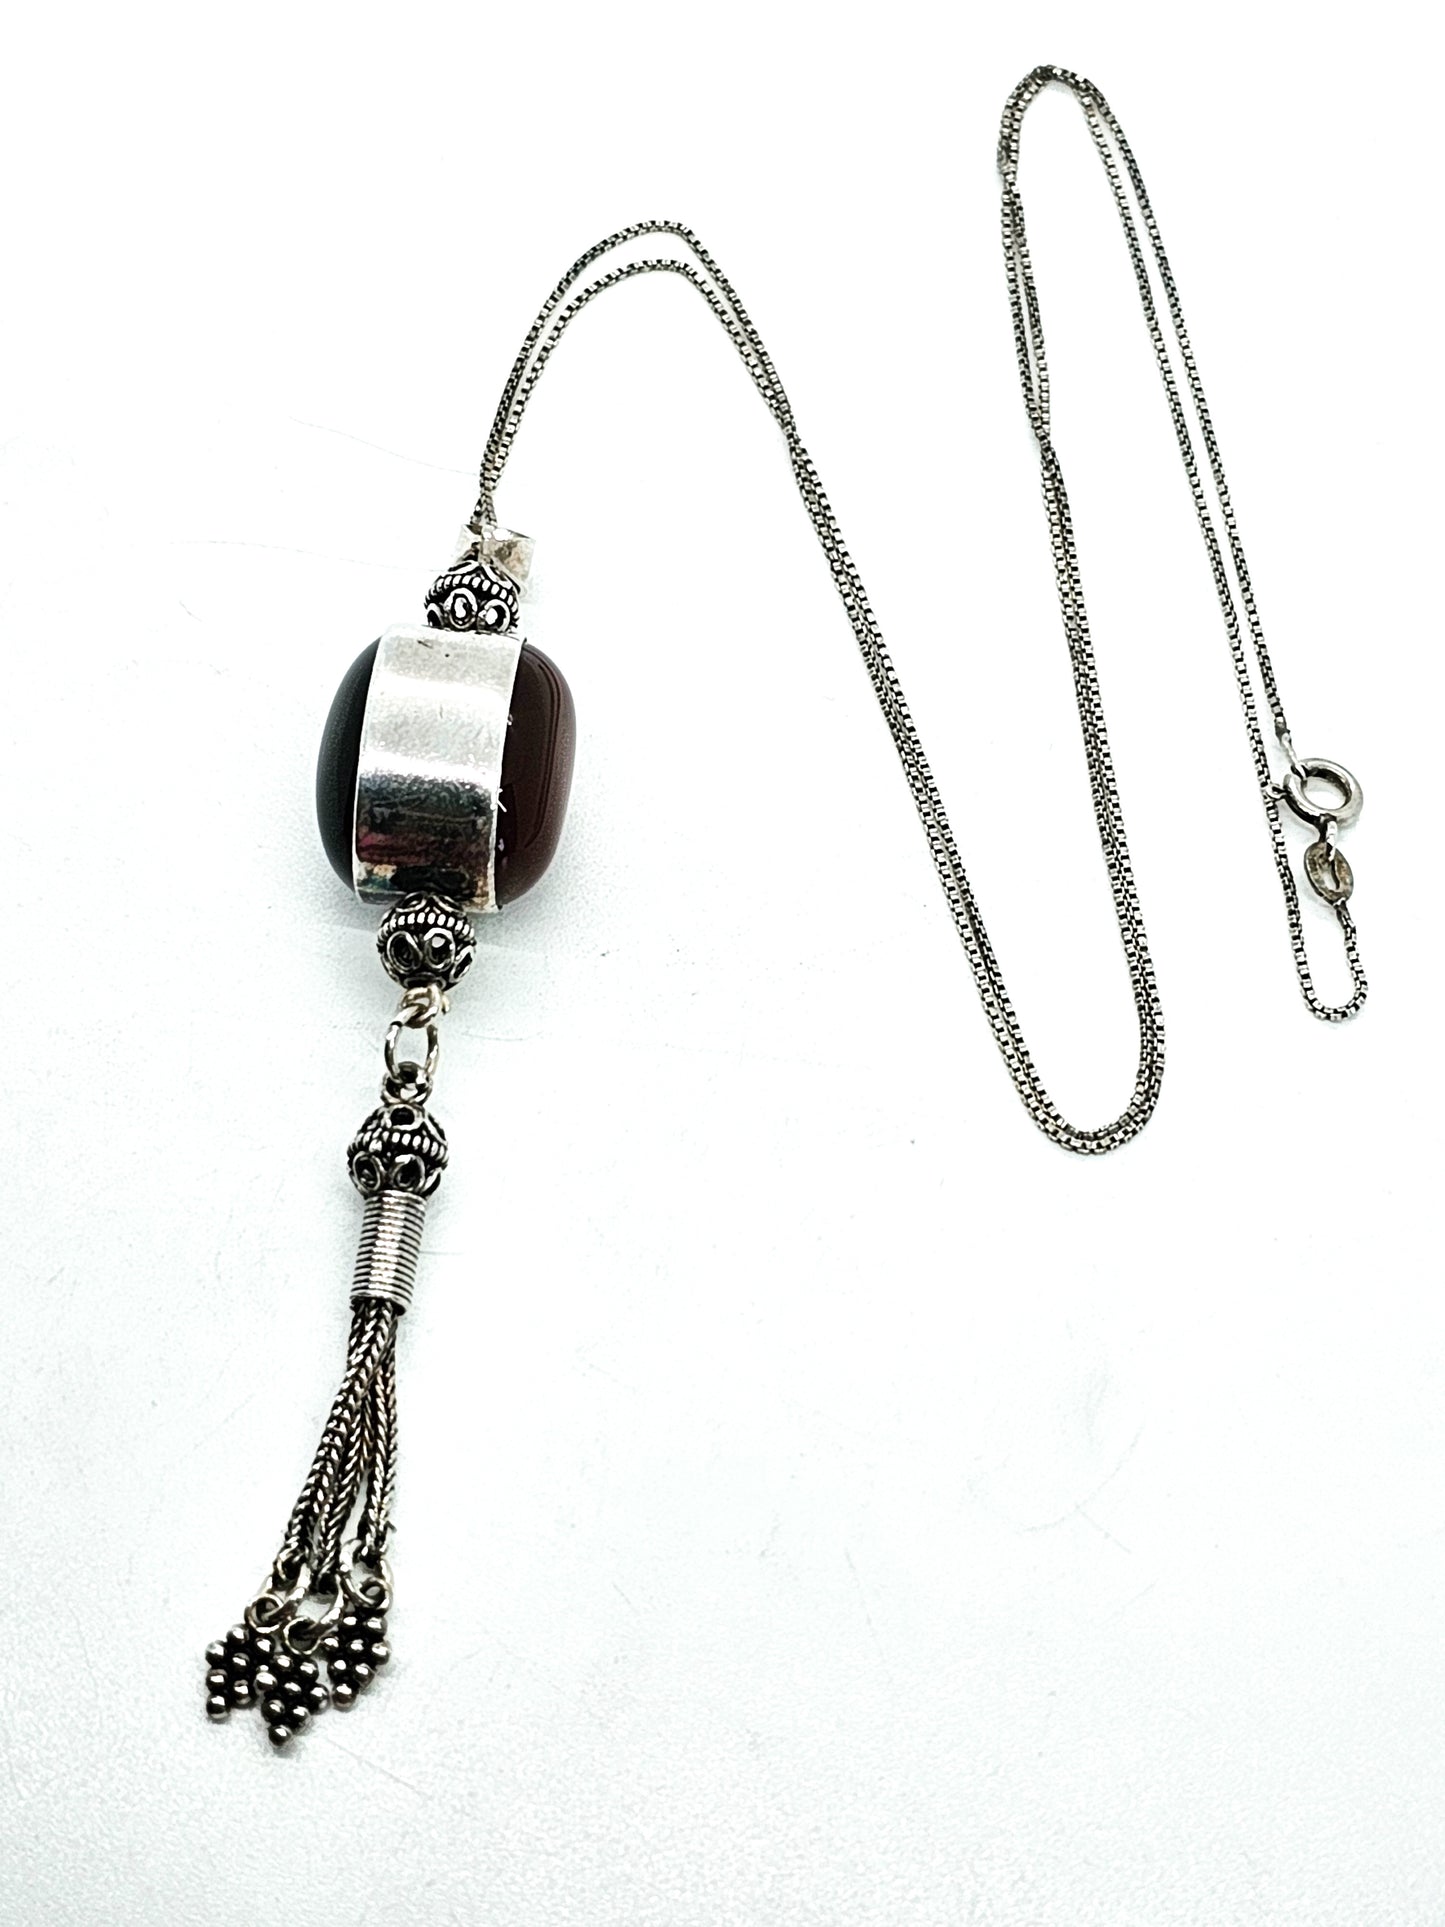 Onyx and Carnelian double sided long drop tassel vintage sterling silver necklace